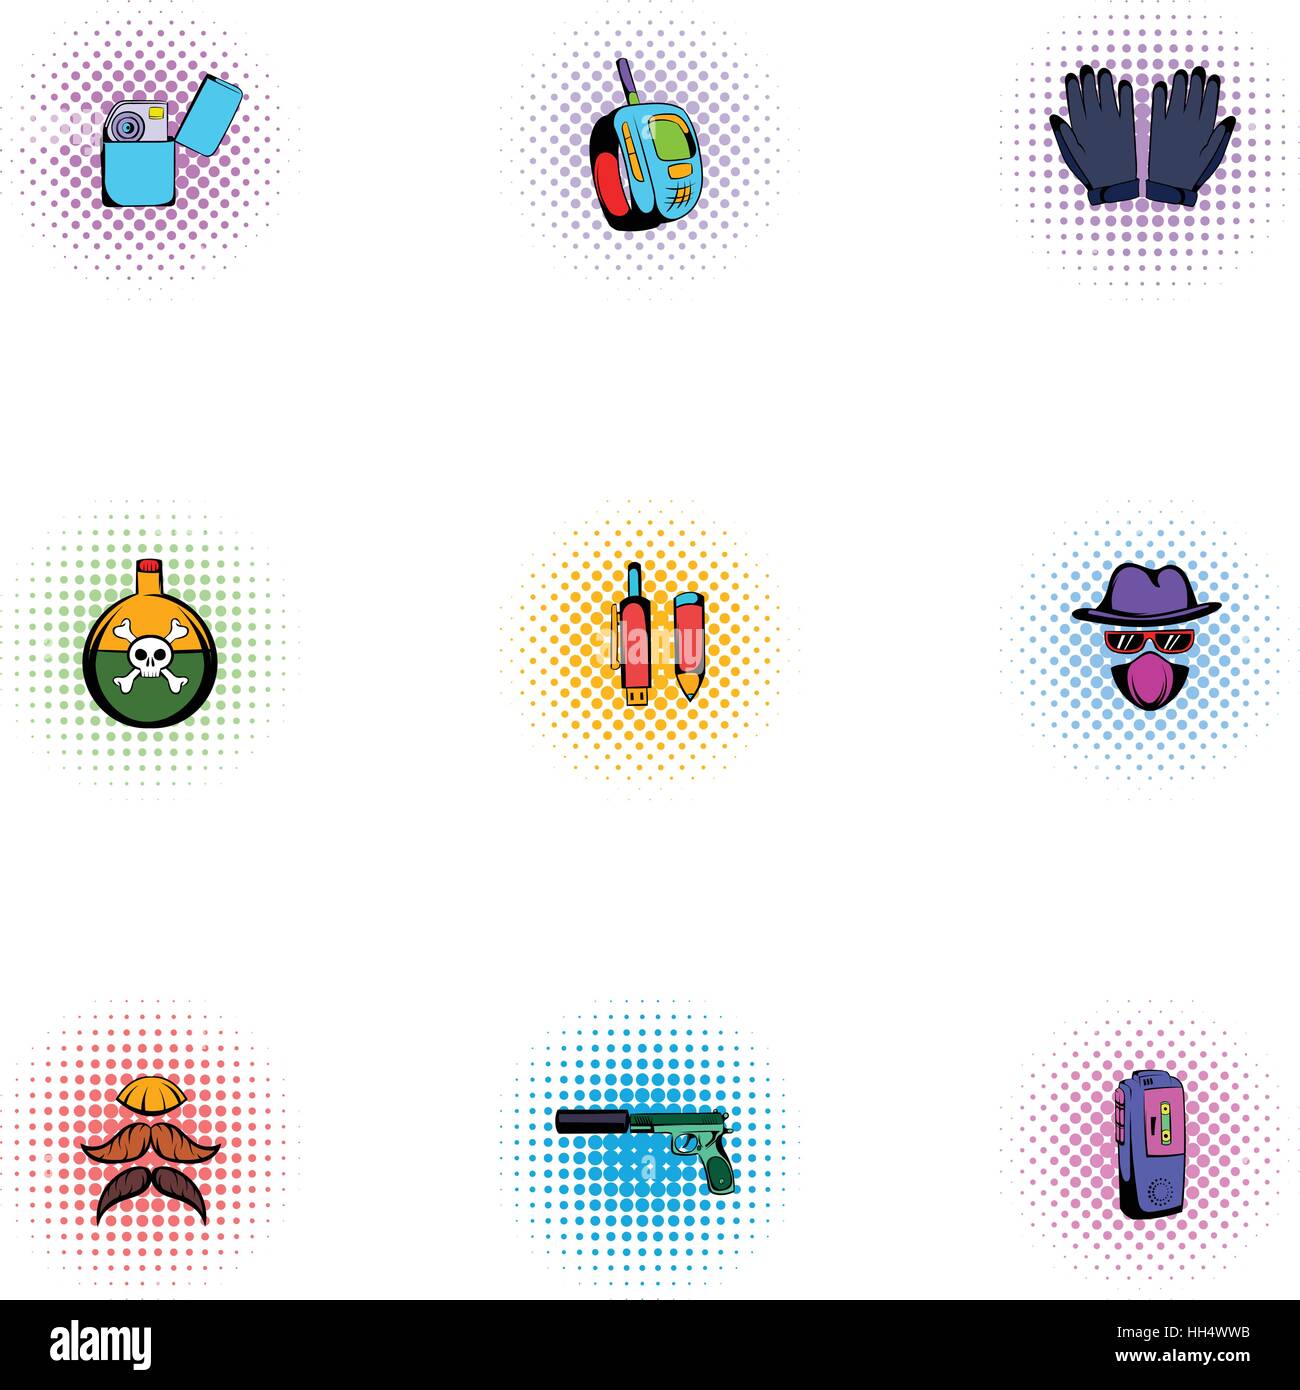 Search Illegal action icons set, pop-art style Stock Vector